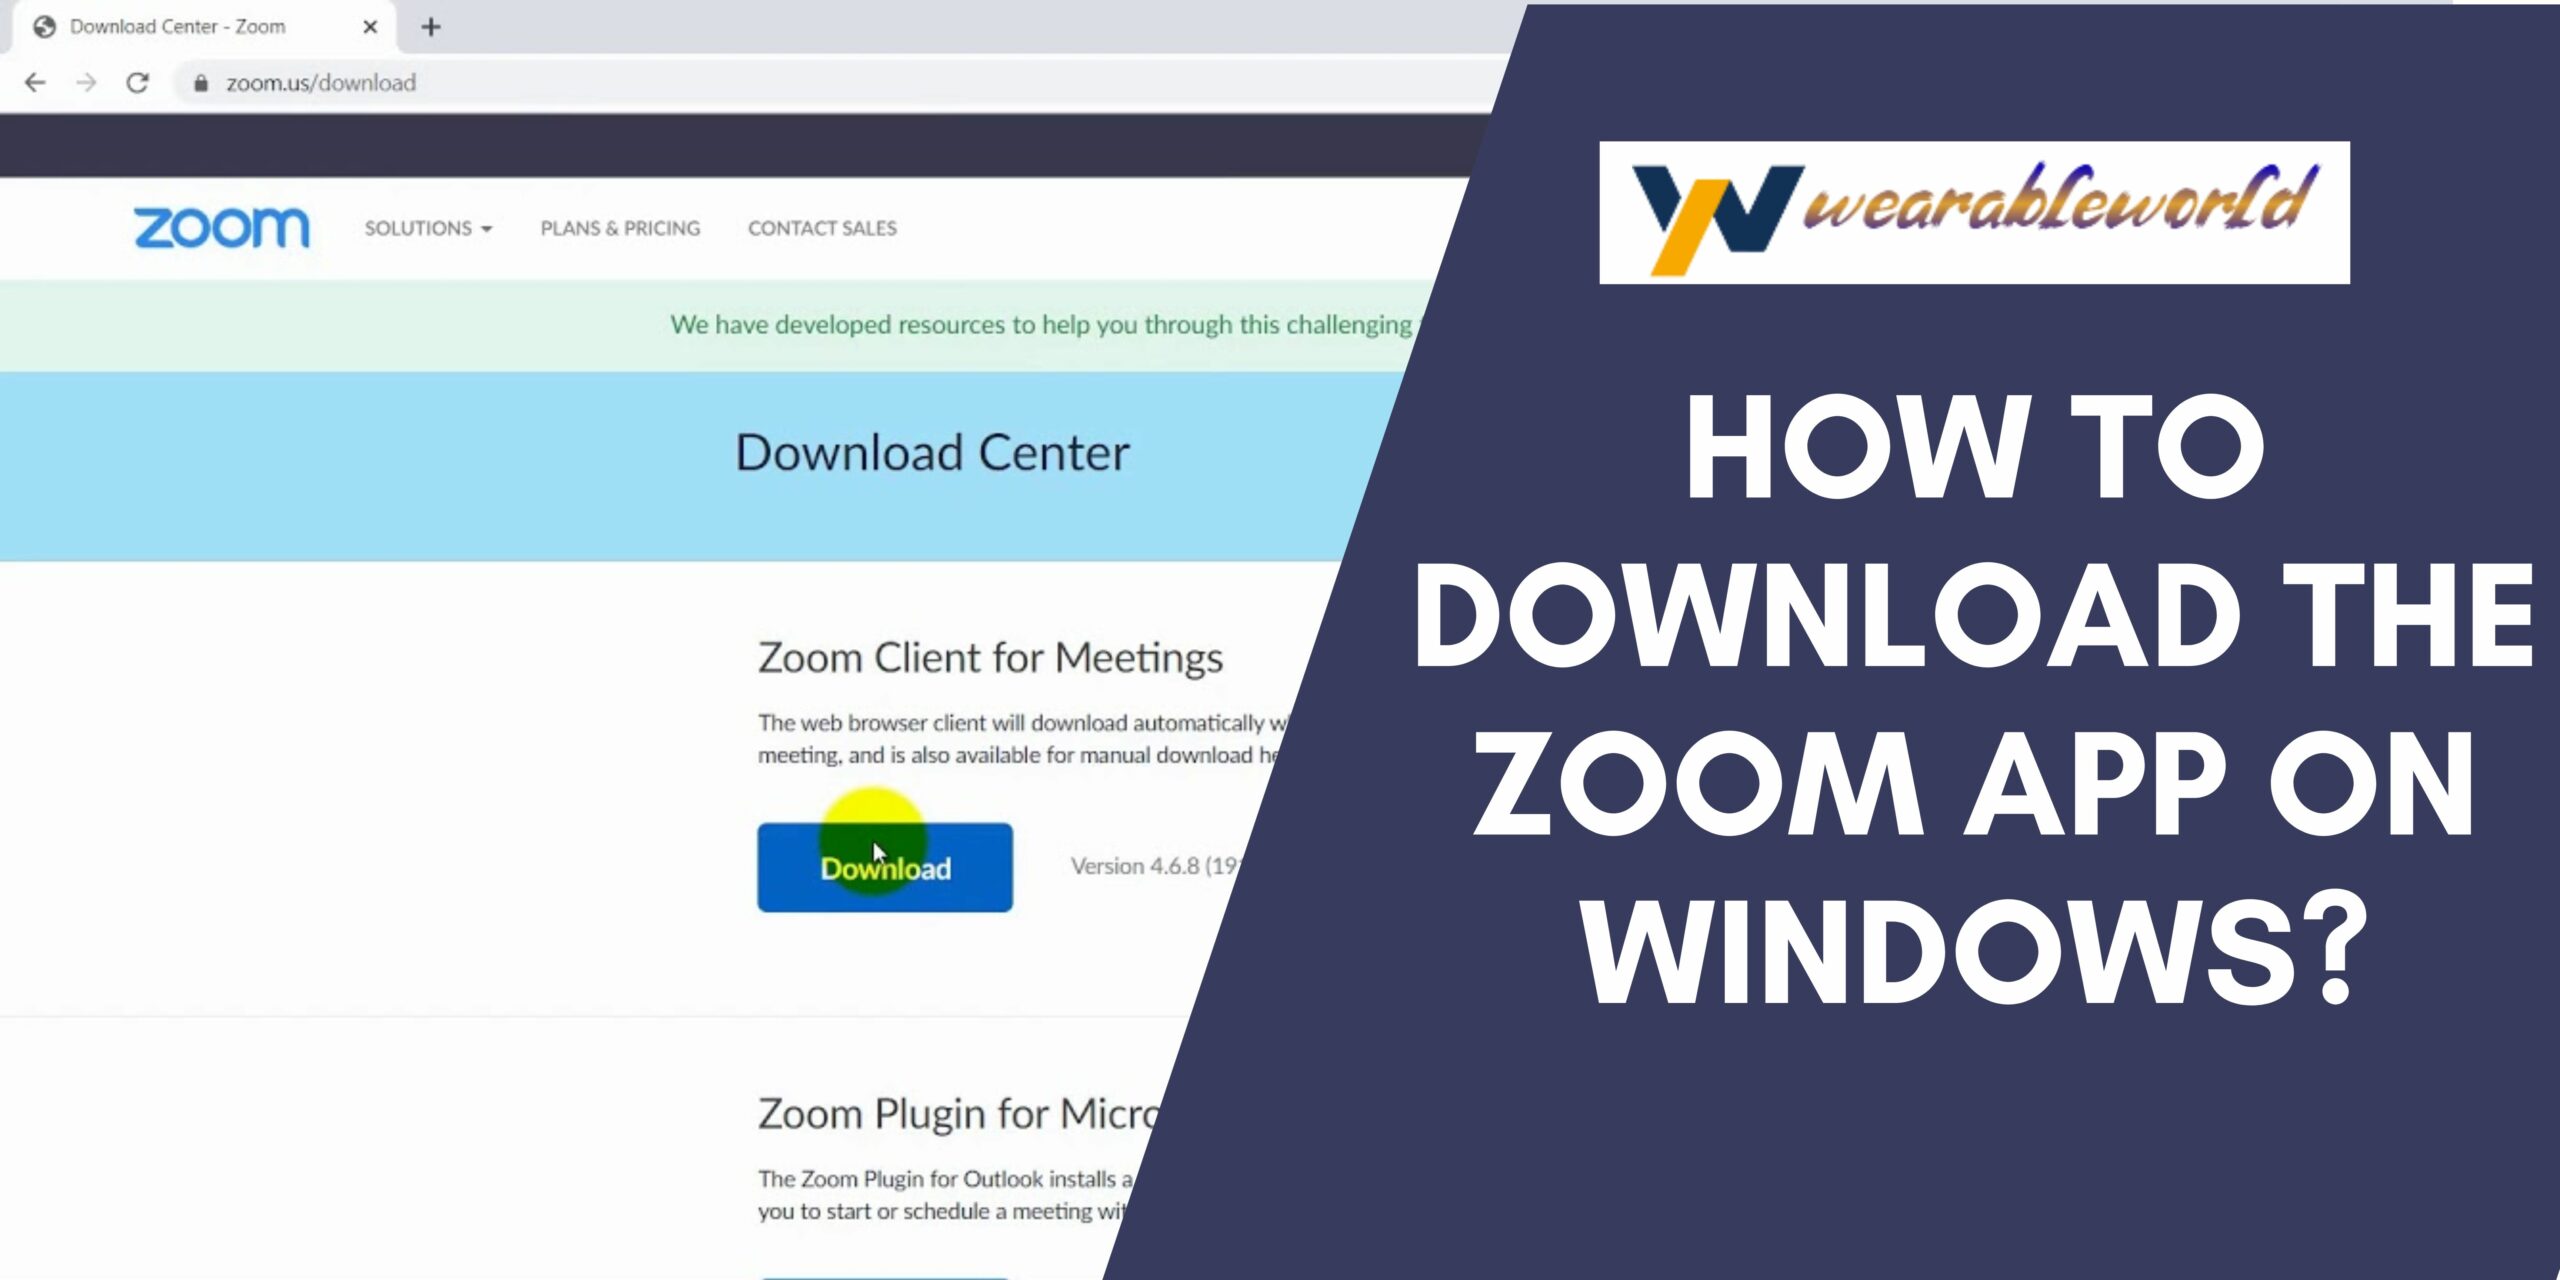 Download the Zoom app on Windows